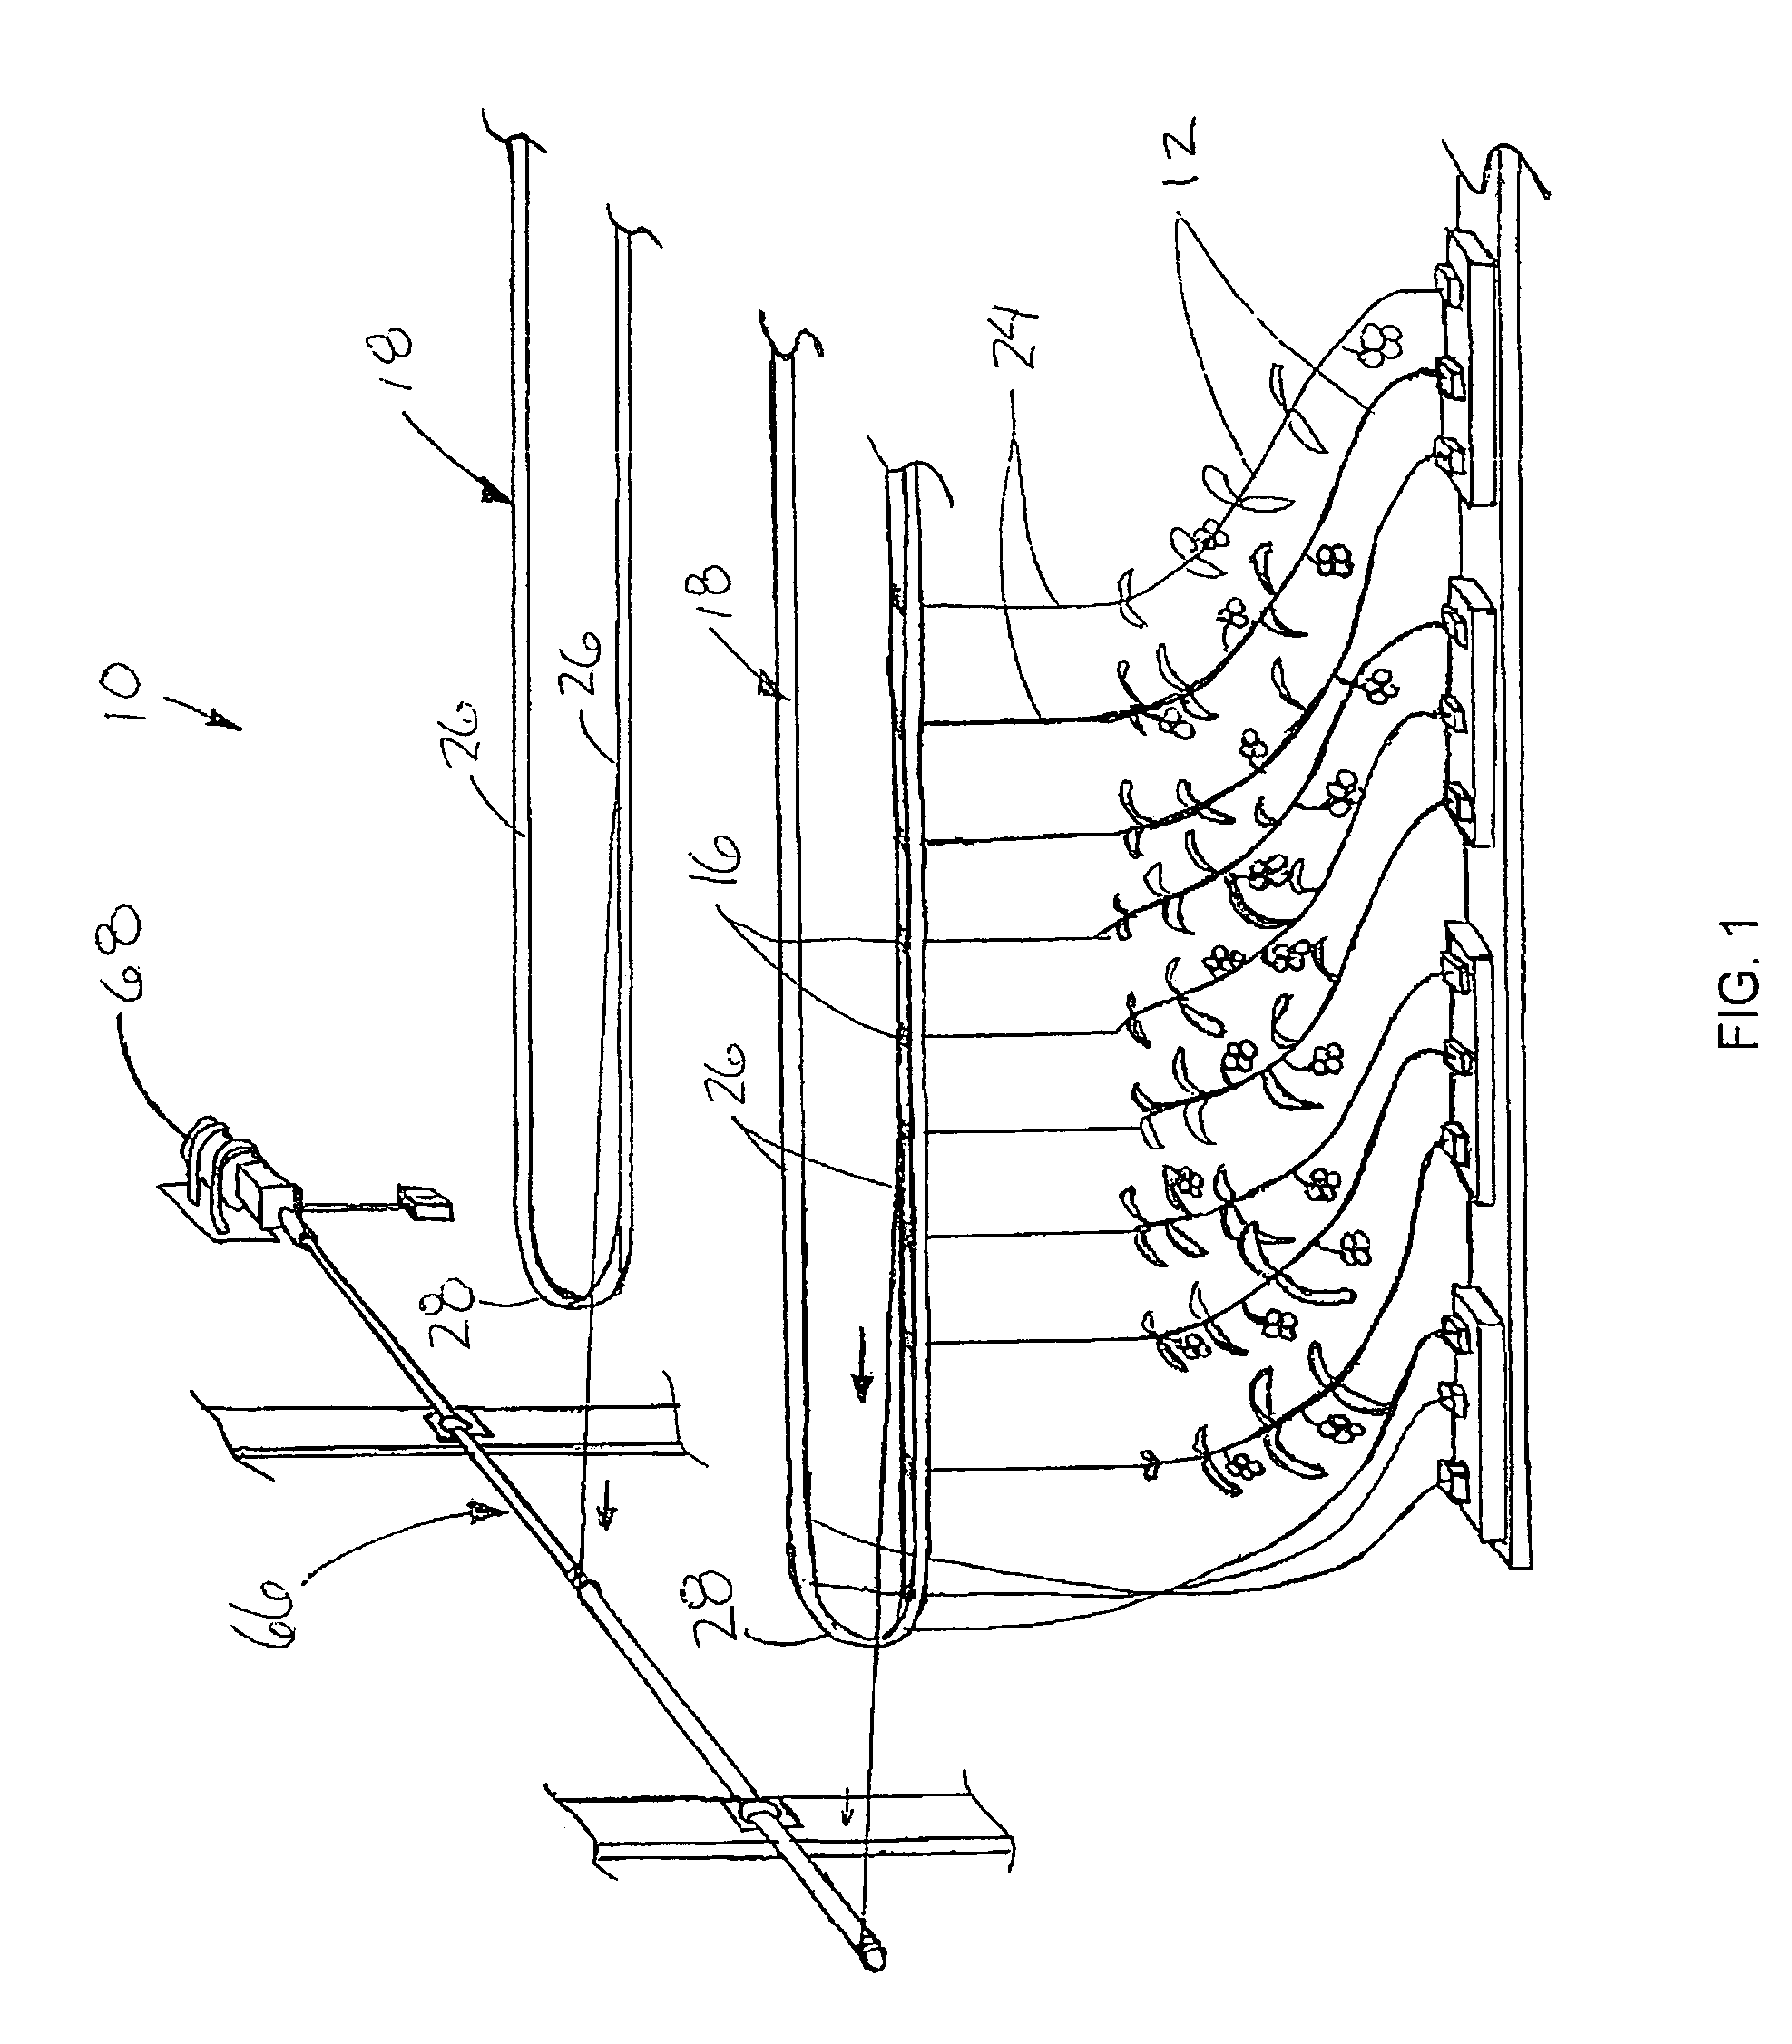 Vine crop supporting system